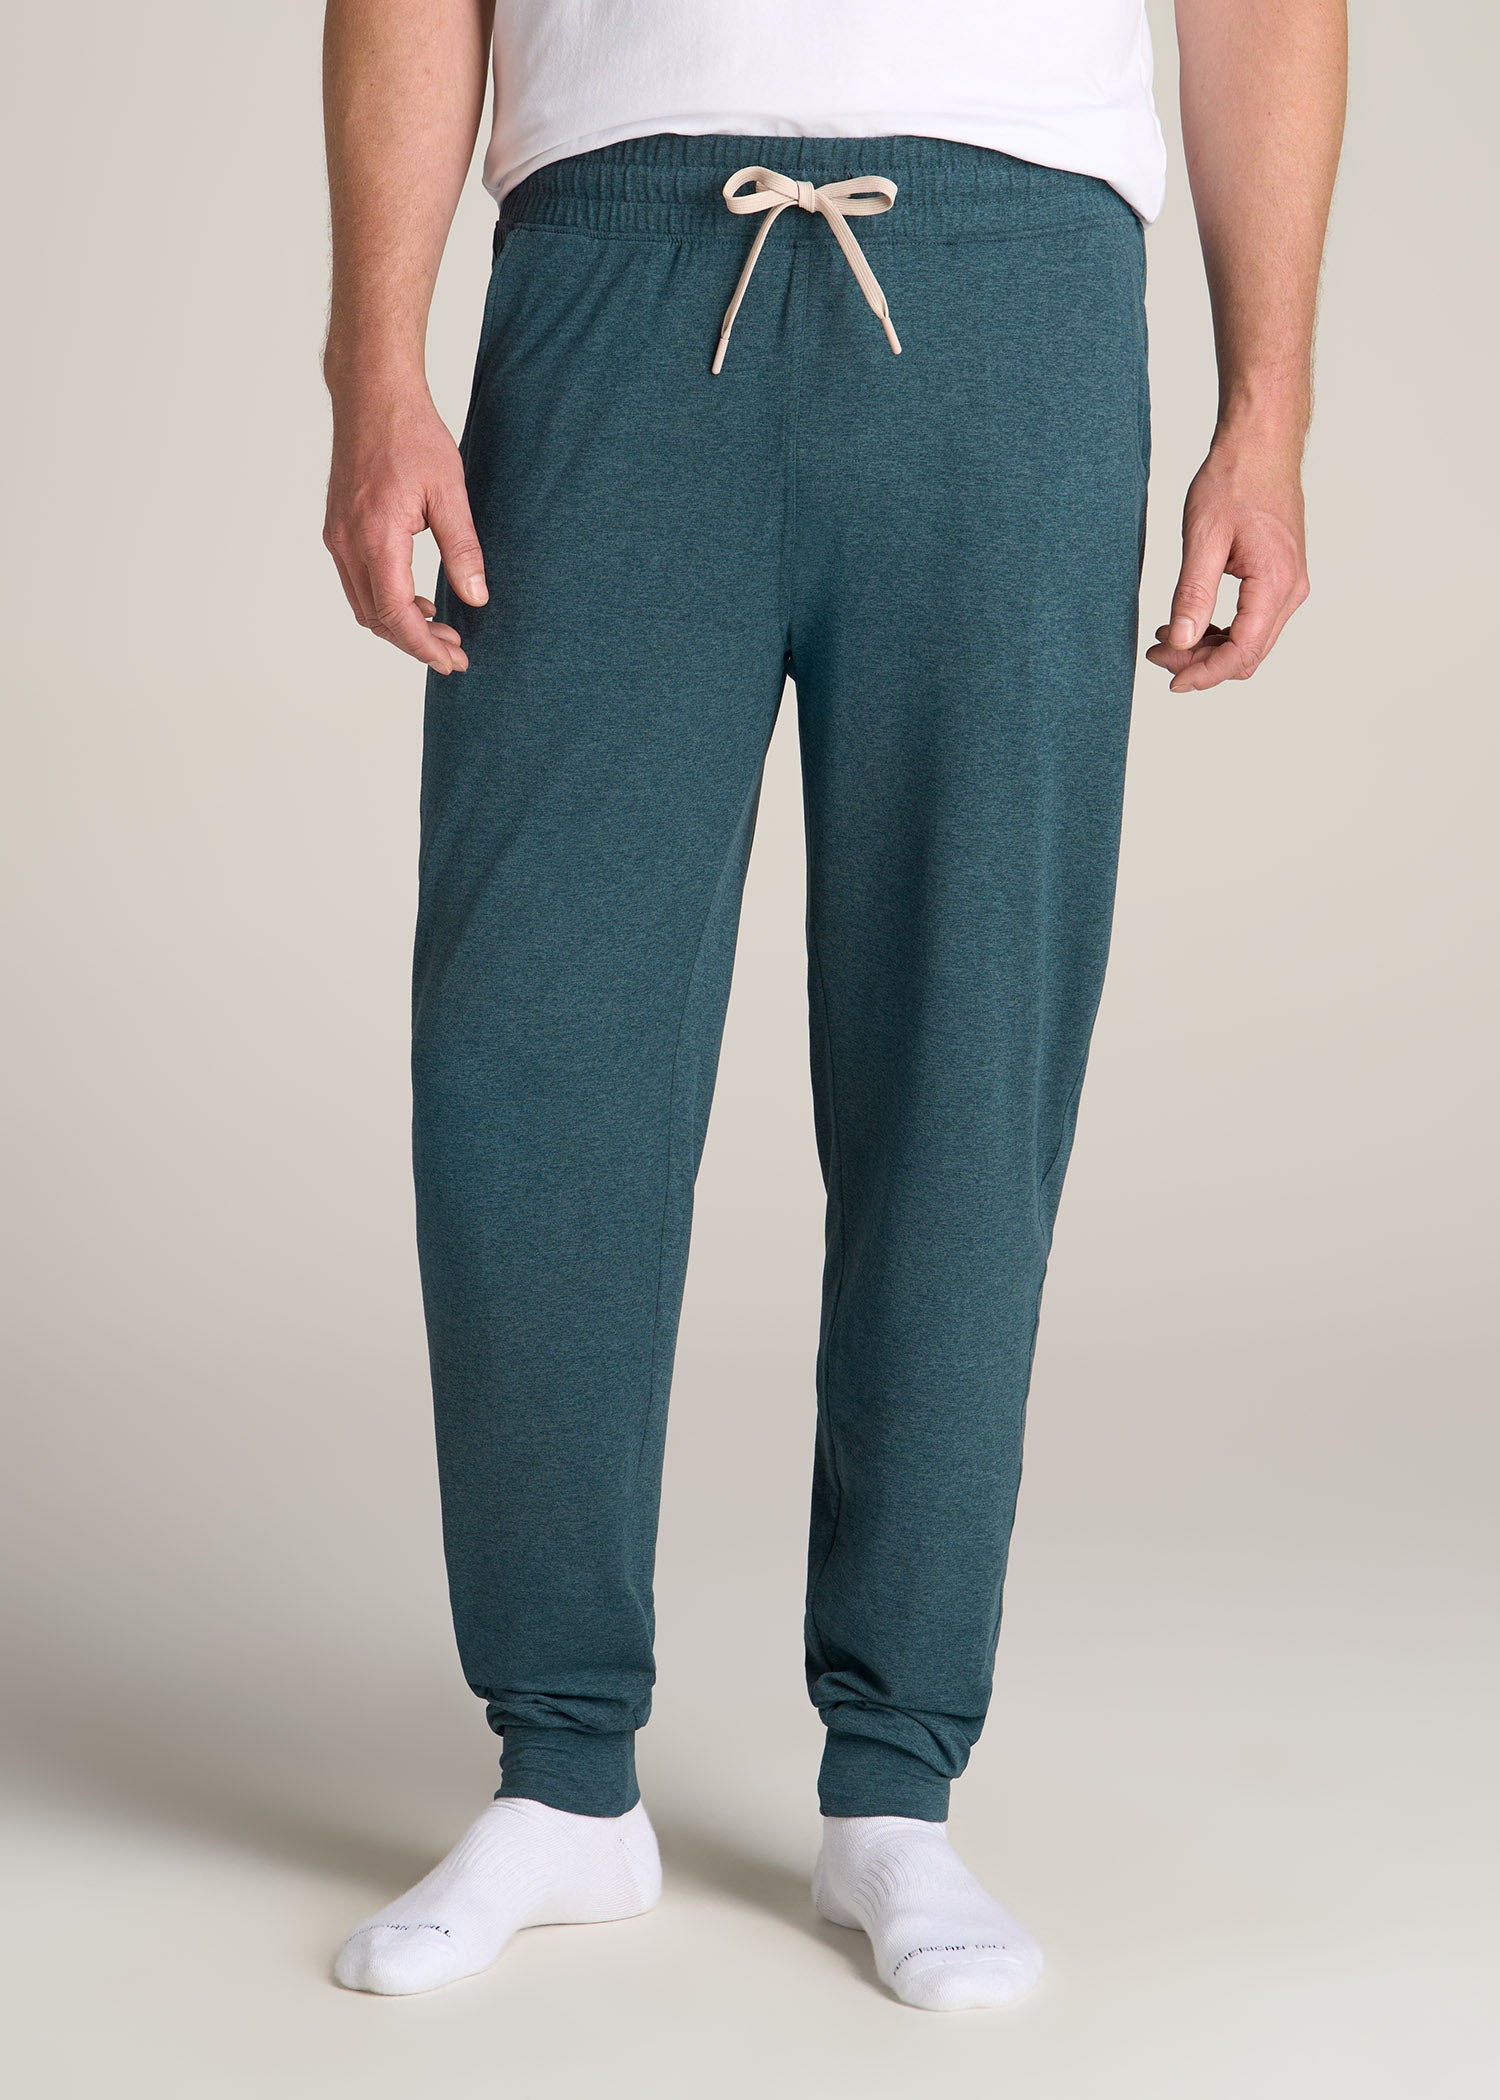 lululemon athletica The Darkness Pajama Pants for Women